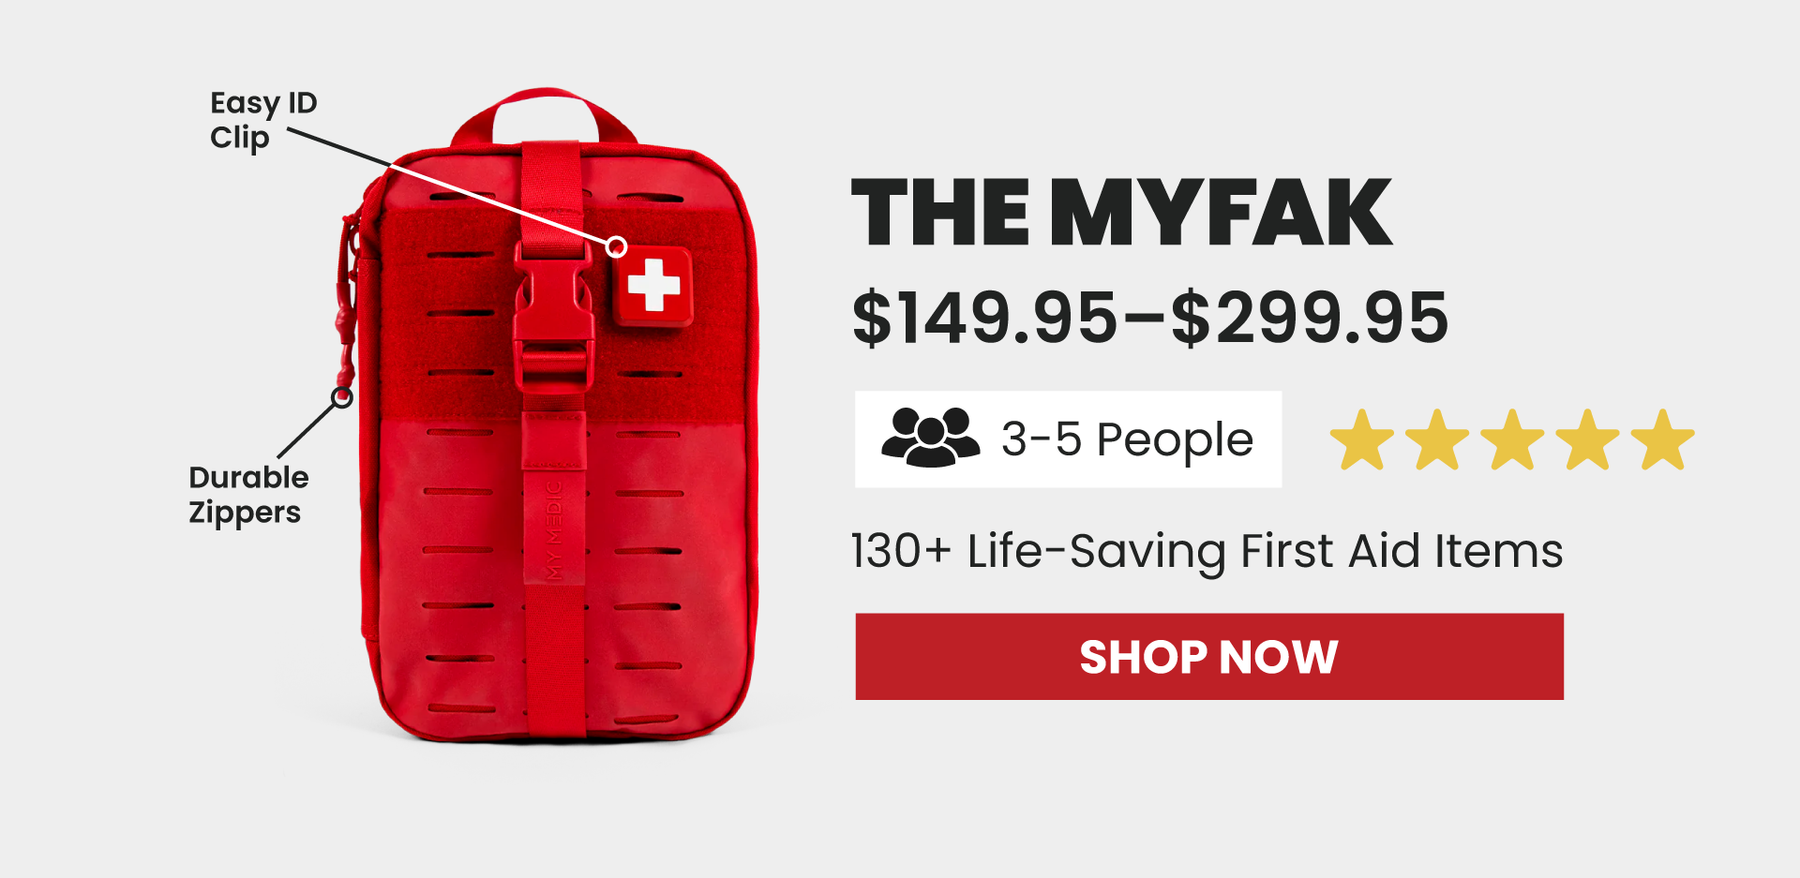 MyFAK, $149.95-$299.95, 3-5 People, 130+ Life-Saving First Aid Items, Shop Now